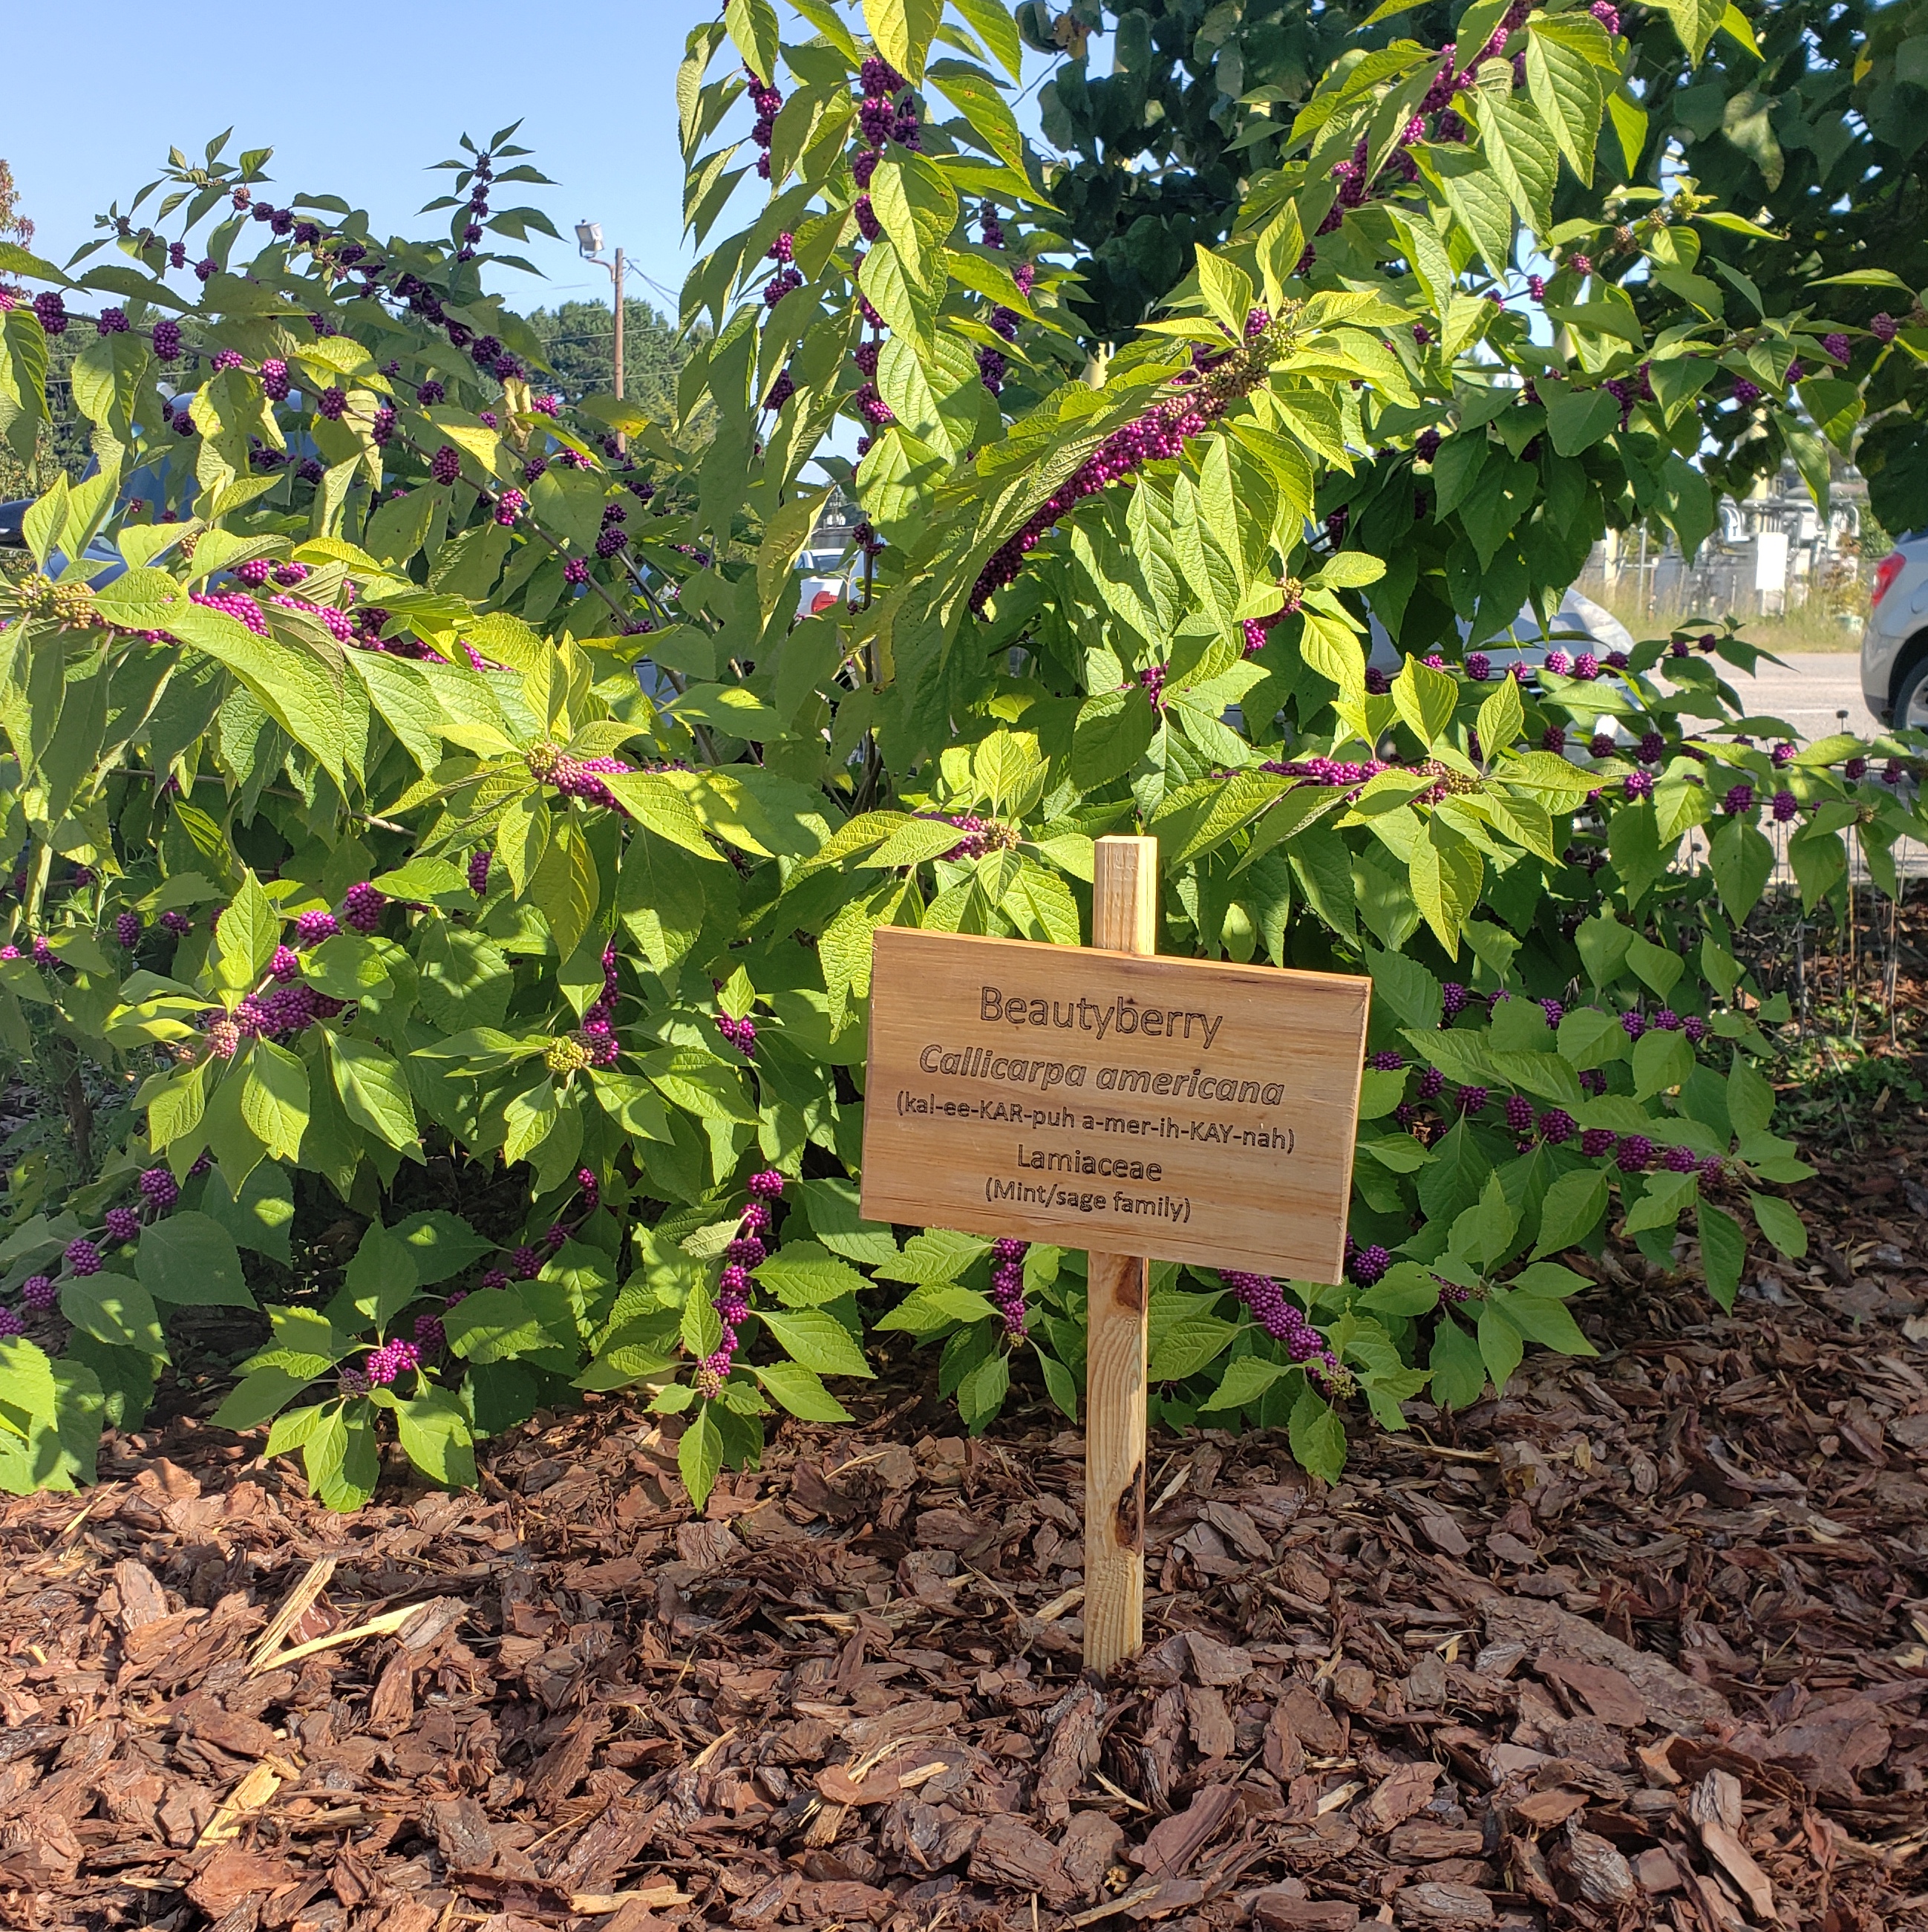 A wooden sign denotes a plant as beautyberry, it is in front of a green bush with purple berries, planted in mulch.